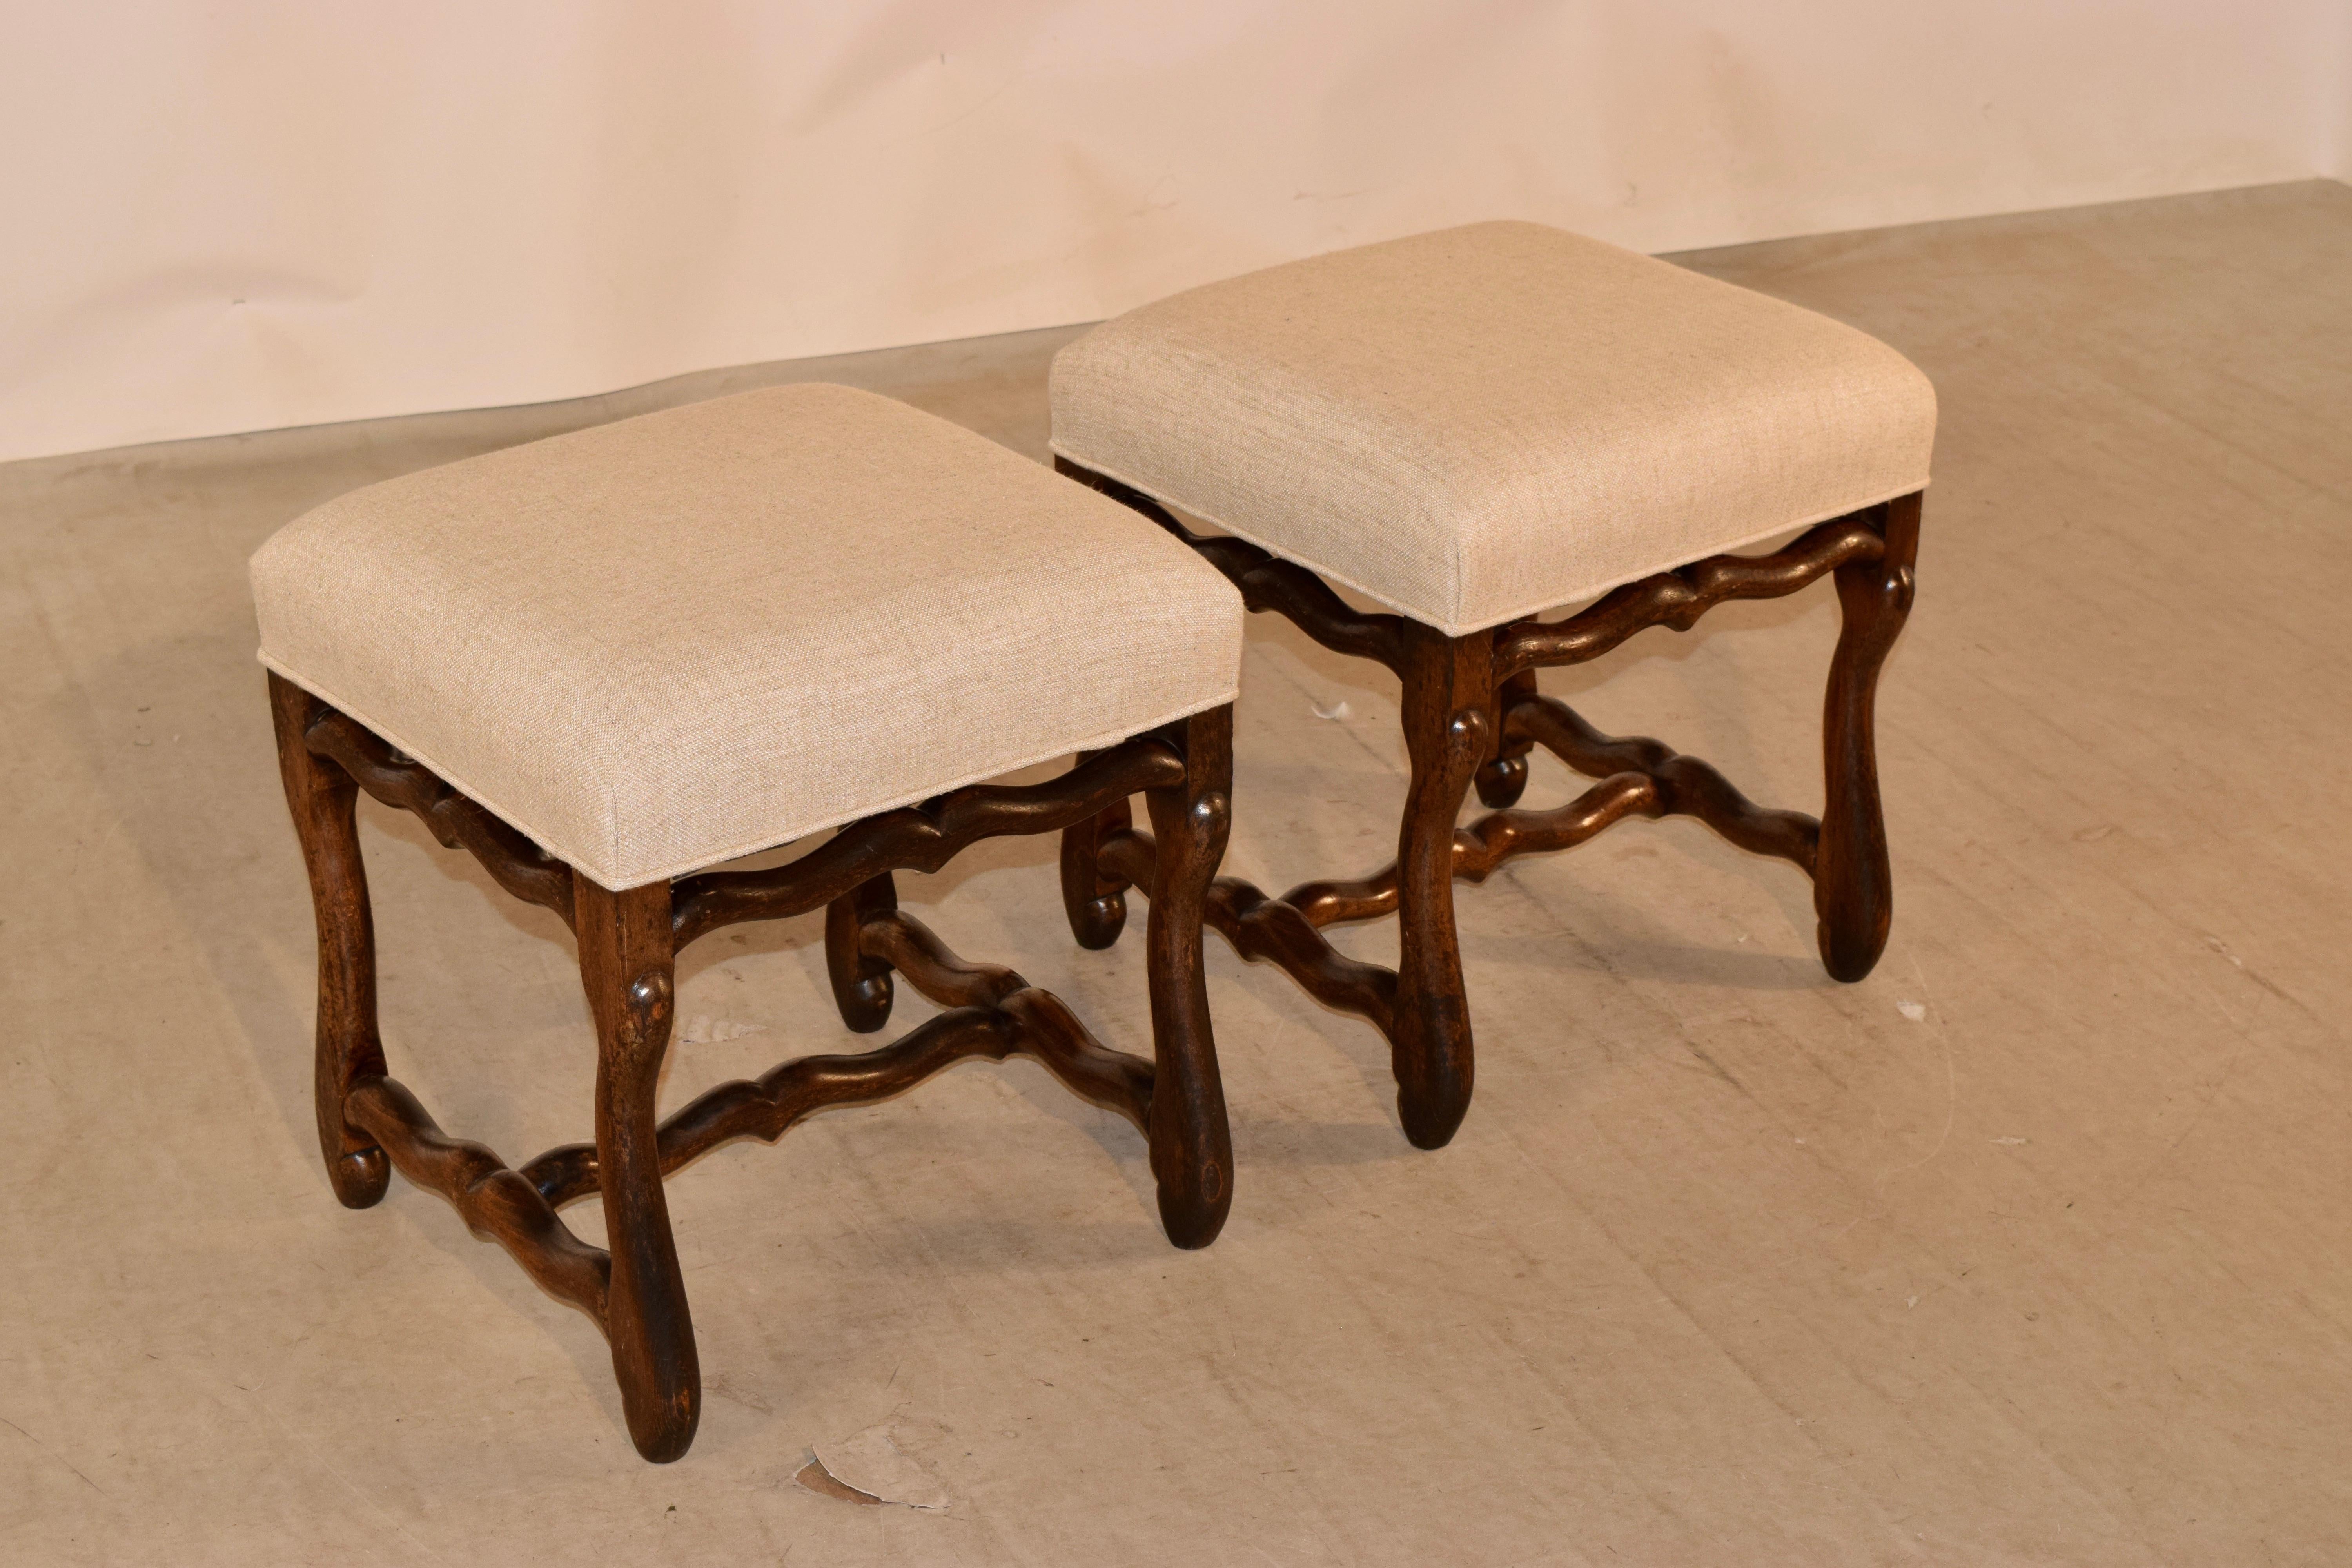 19th century pair of oak mutton leg stools from France. The seats have been newly upholstered in linen and are supported on hand carved oak frames with mutton legs and serpentine shaped stretchers.